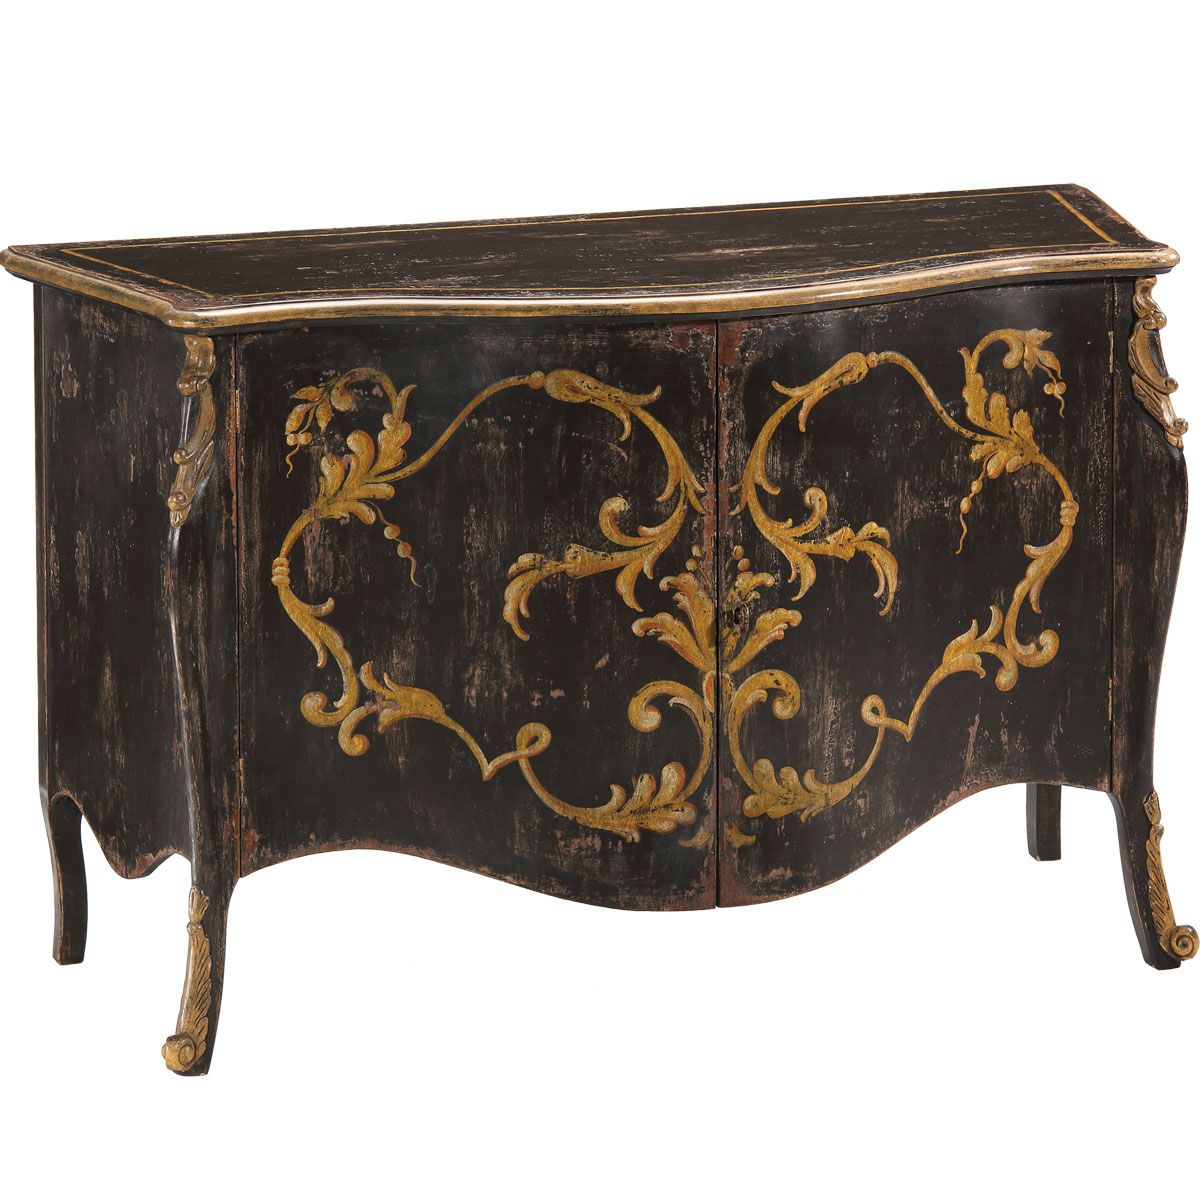 Heavily Antiqued Louis Xv Bombe Credenza | Dandelion Spell Within Copper Leaf Wood Credenzas (View 17 of 30)